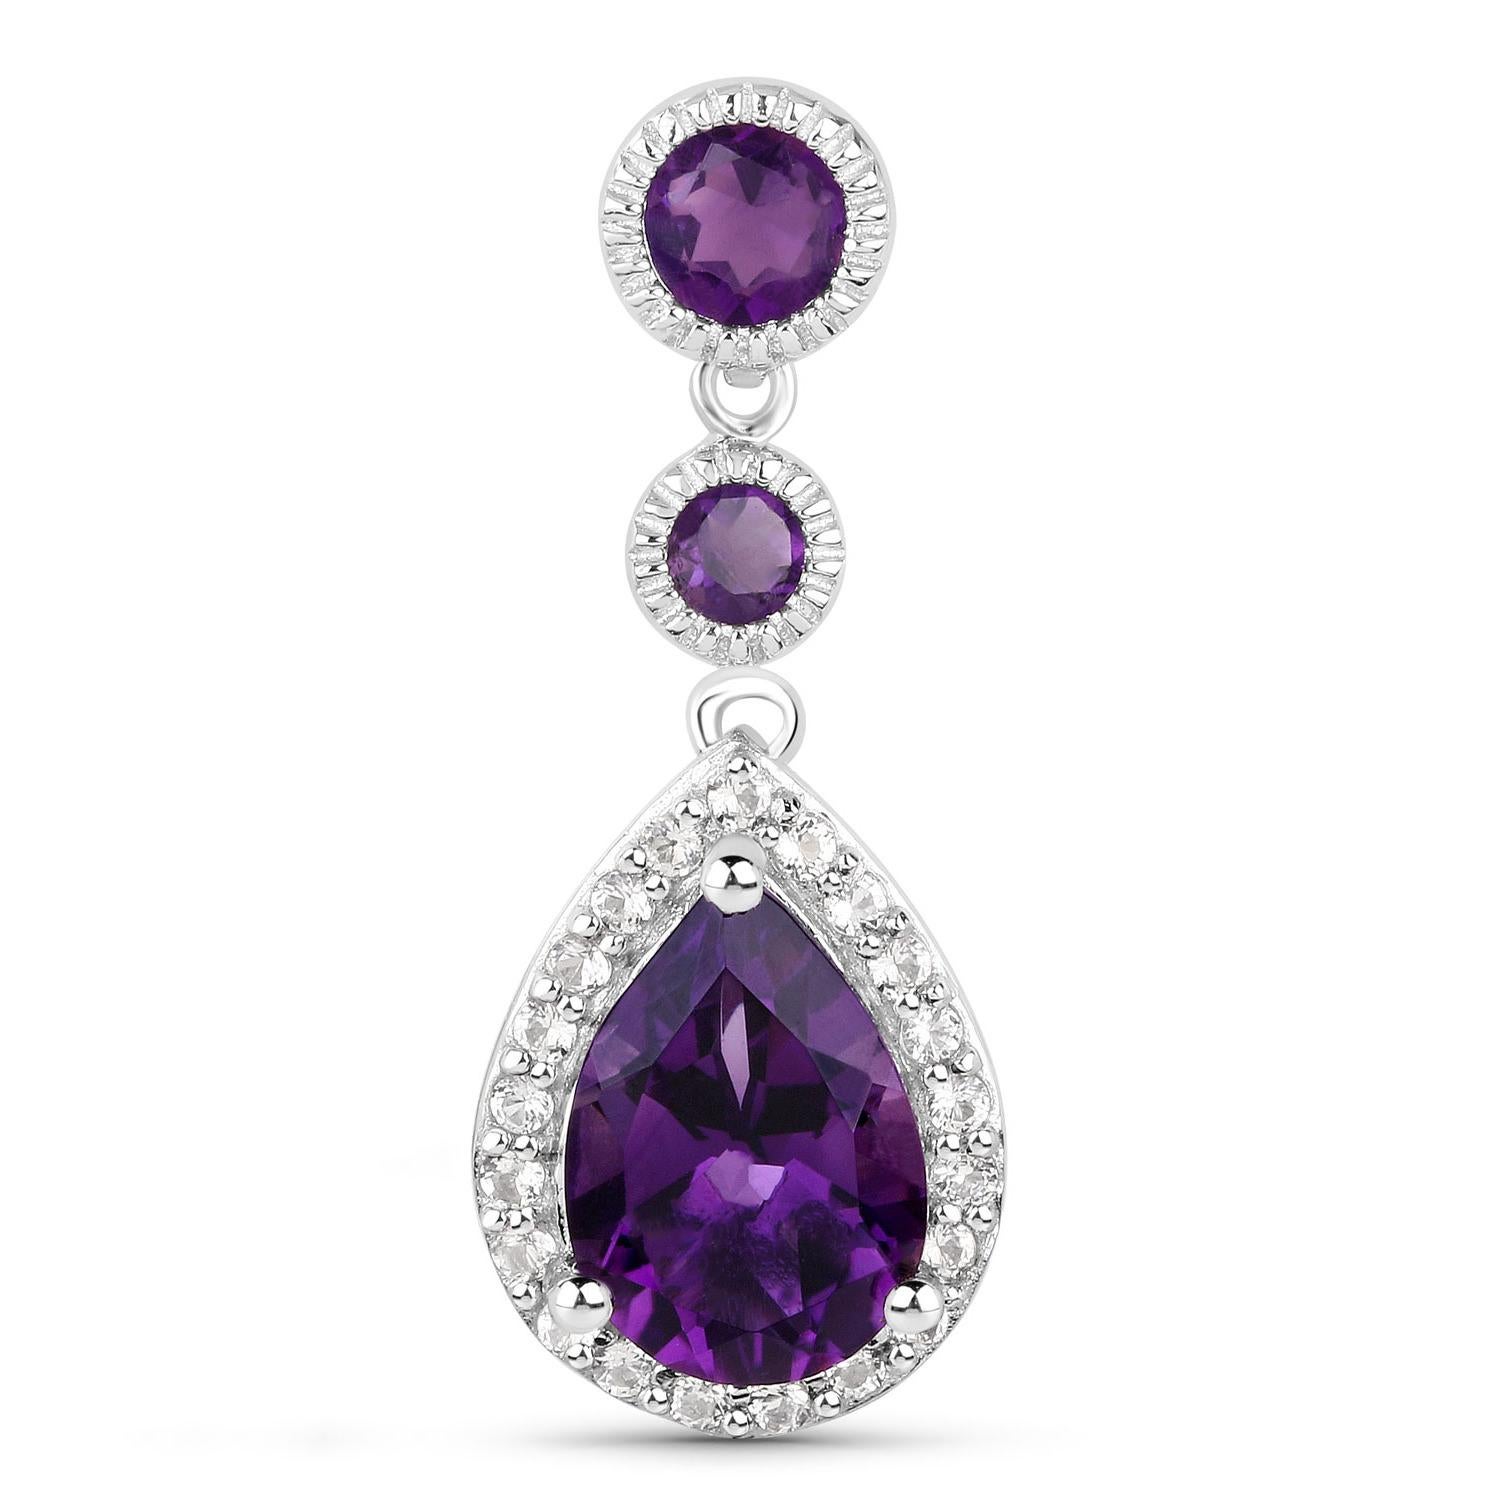 Massive 7 Carats Amethyst and White Topaz Dangle Earrings 18k White Gold Plated In Excellent Condition For Sale In Laguna Niguel, CA